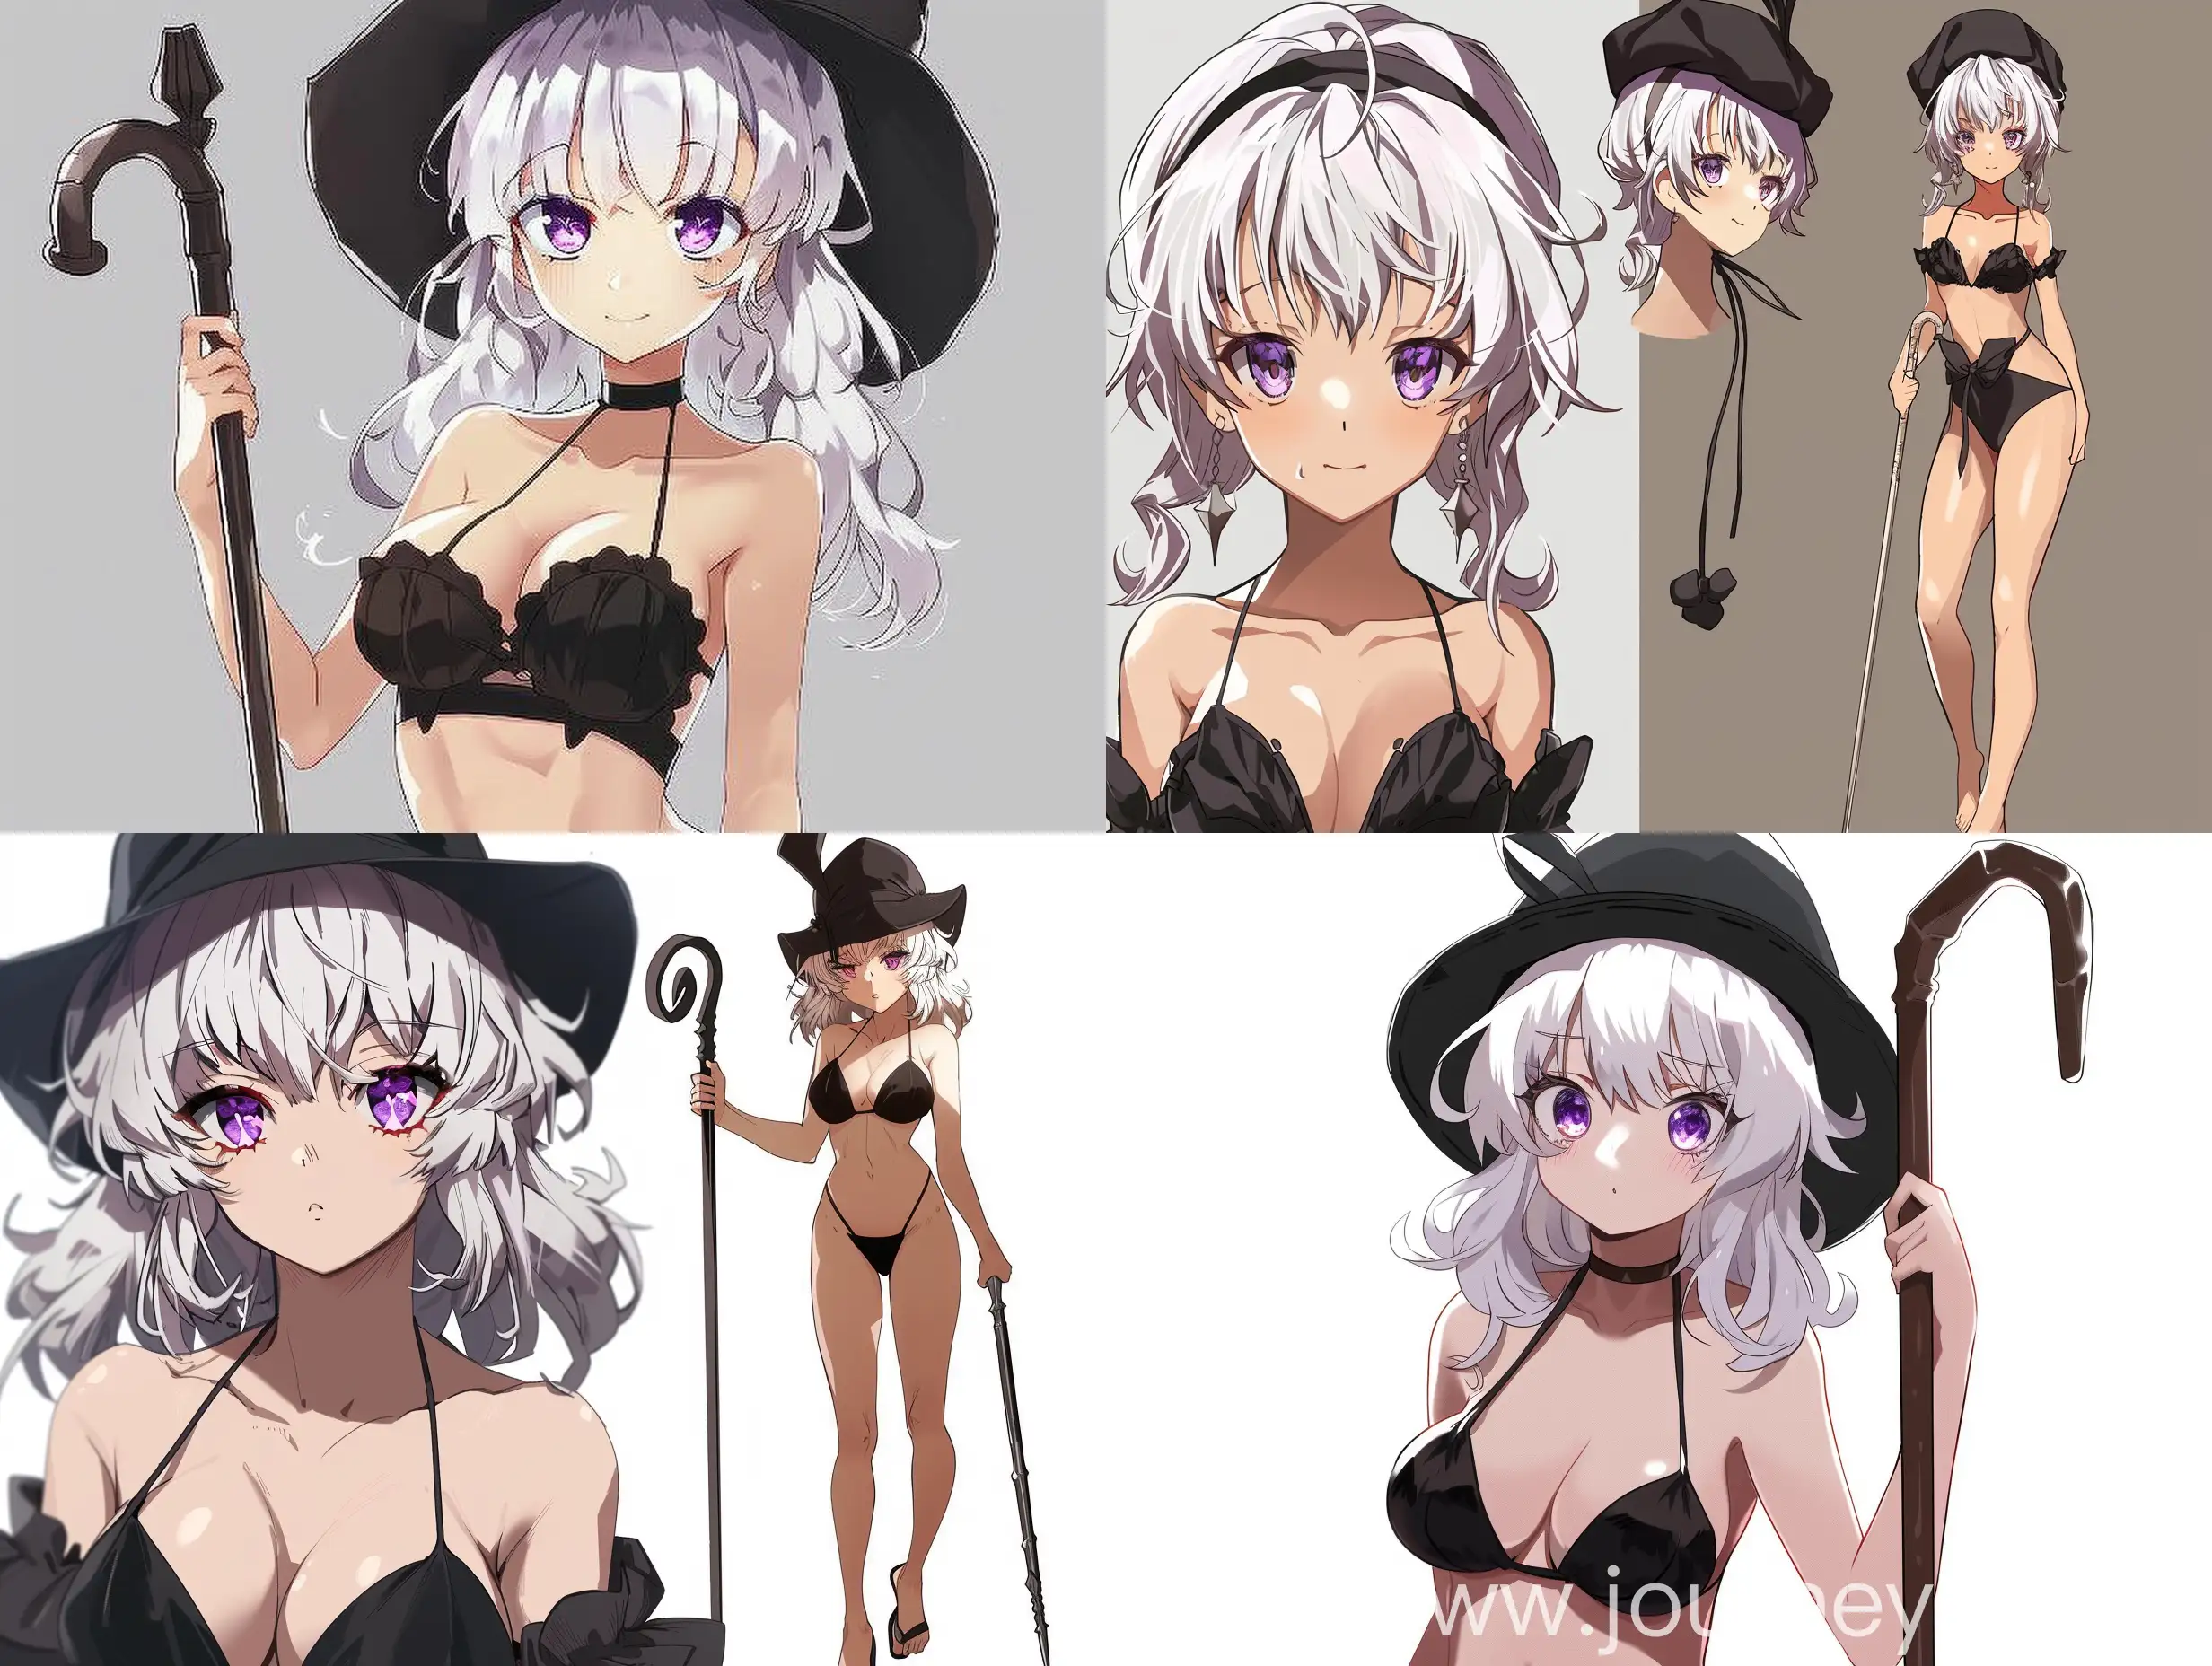 Arisu Sakayanagi from Classroom of the Elite with violet eyes, white hair, a faint smile, a mischievous look, wearing a black ball gown, carrying a cane, short stature, and a black beret in hot bikini black 